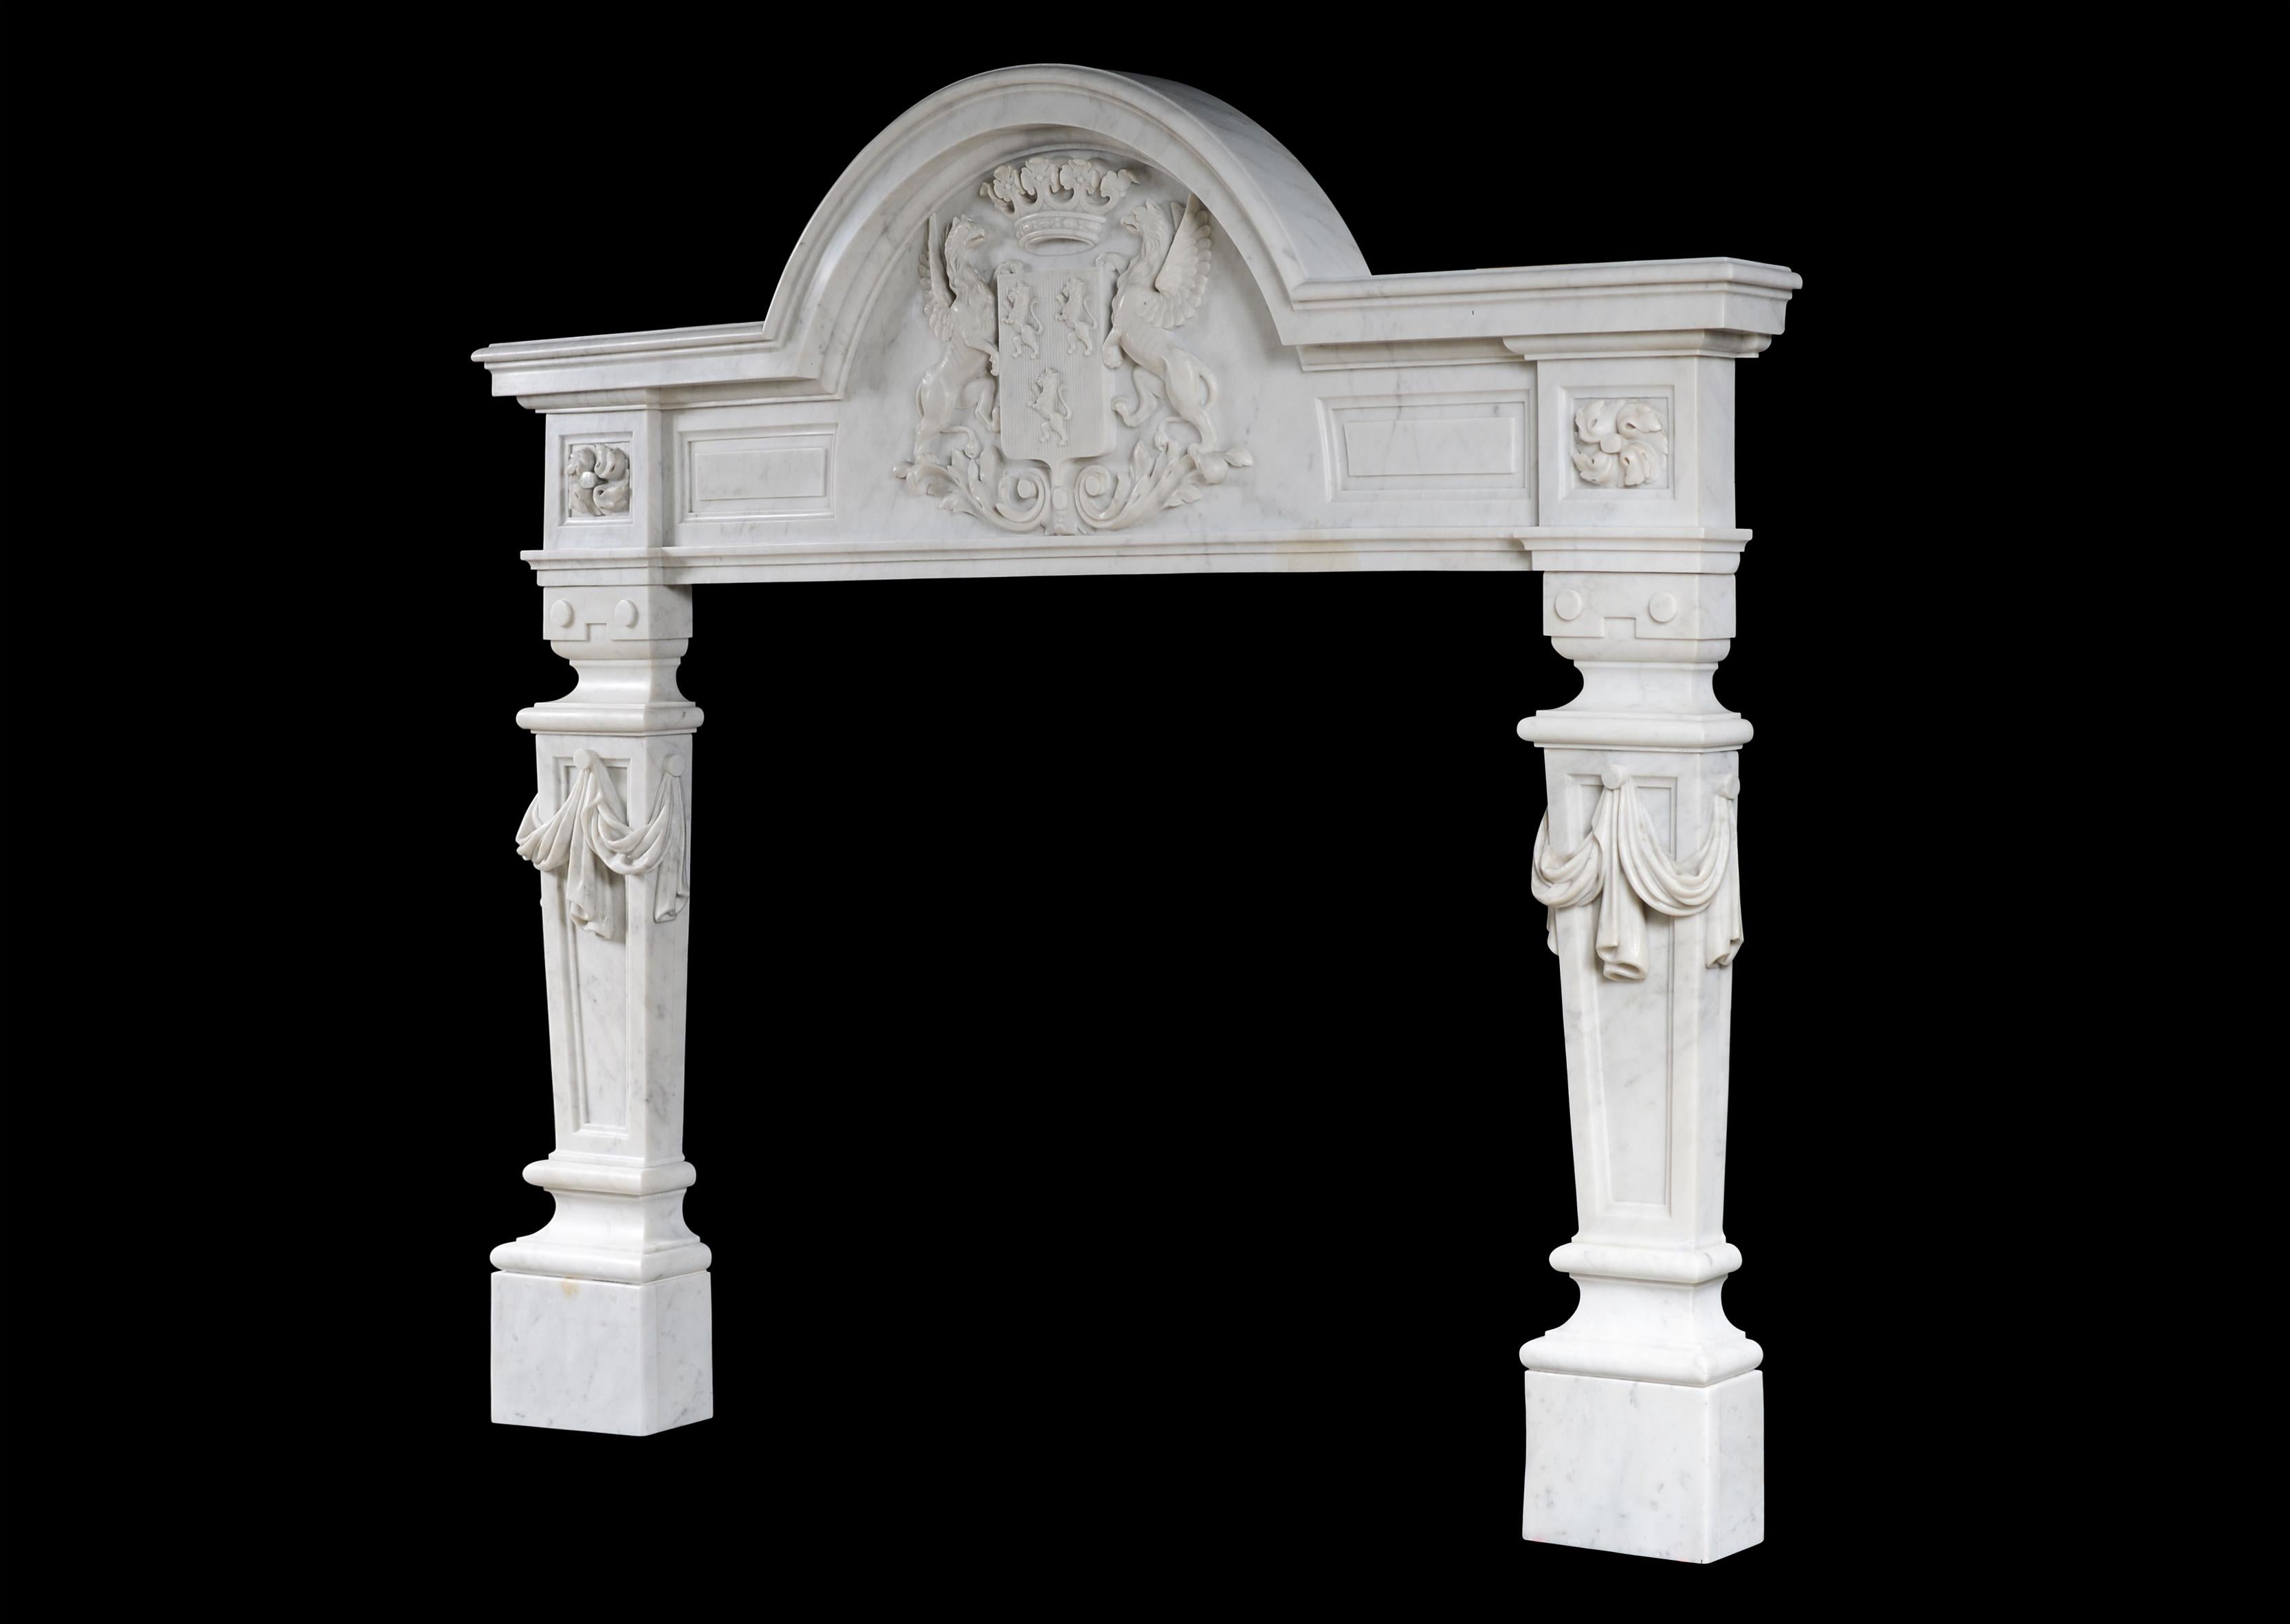 An unusual English Baroque style fireplace in Italian Carrara marble. The substantial frieze with a coat of arms featuring griffins and shield, with swirling floral paterae to end blocks. The tapering, panelled jambs with fine quality carved